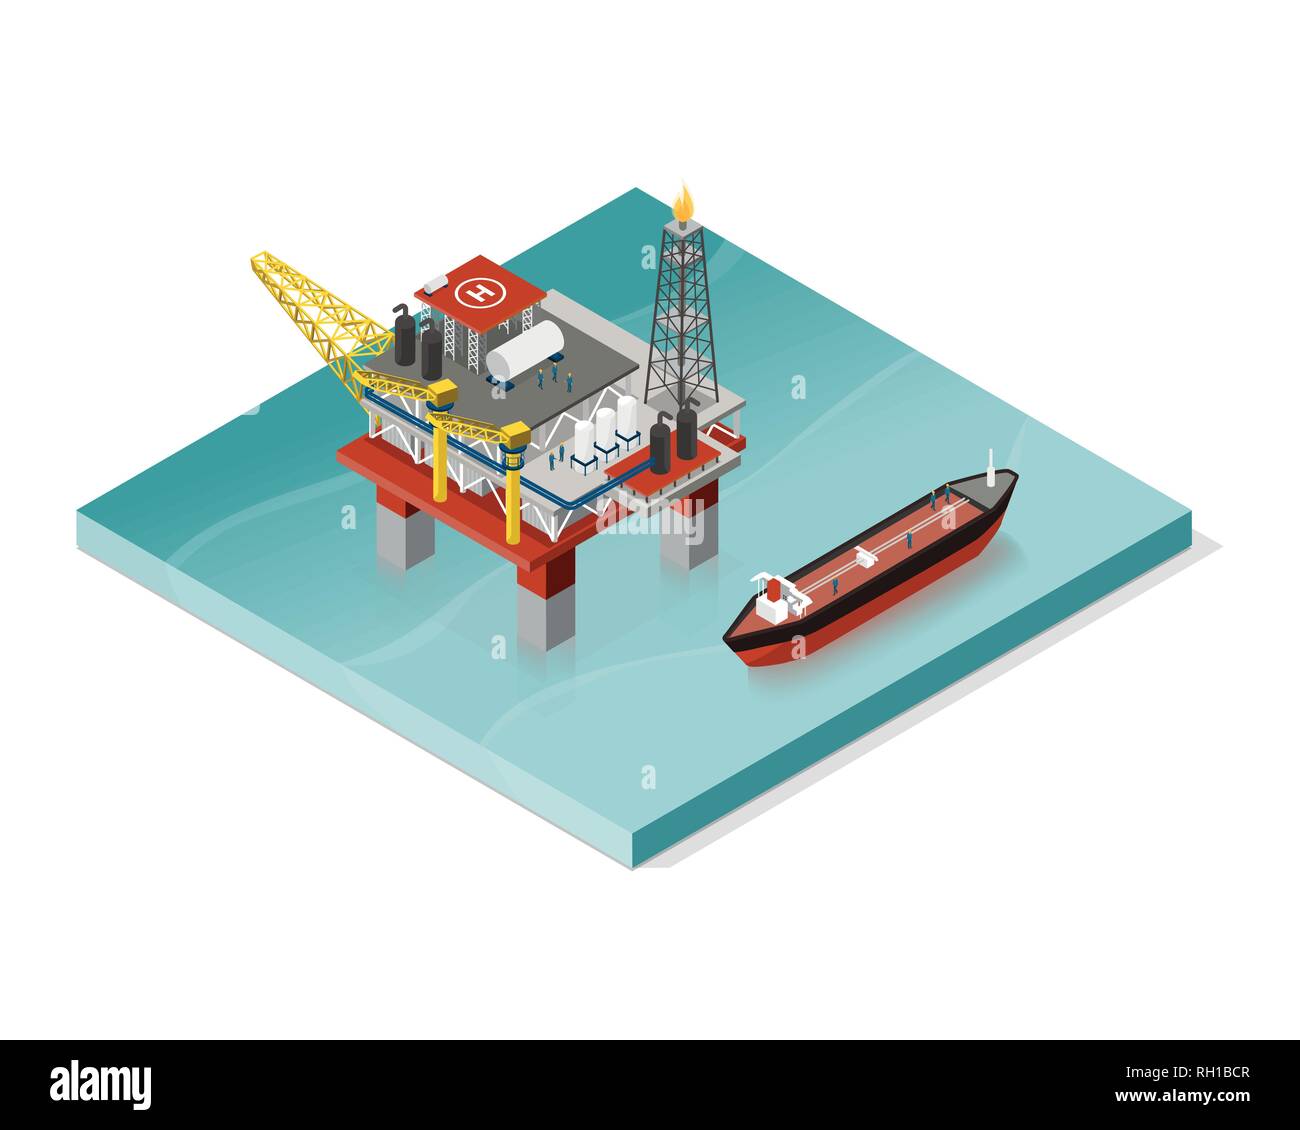 Oil extraction platform and oil tanker: petrochemical industry concept Stock Vector